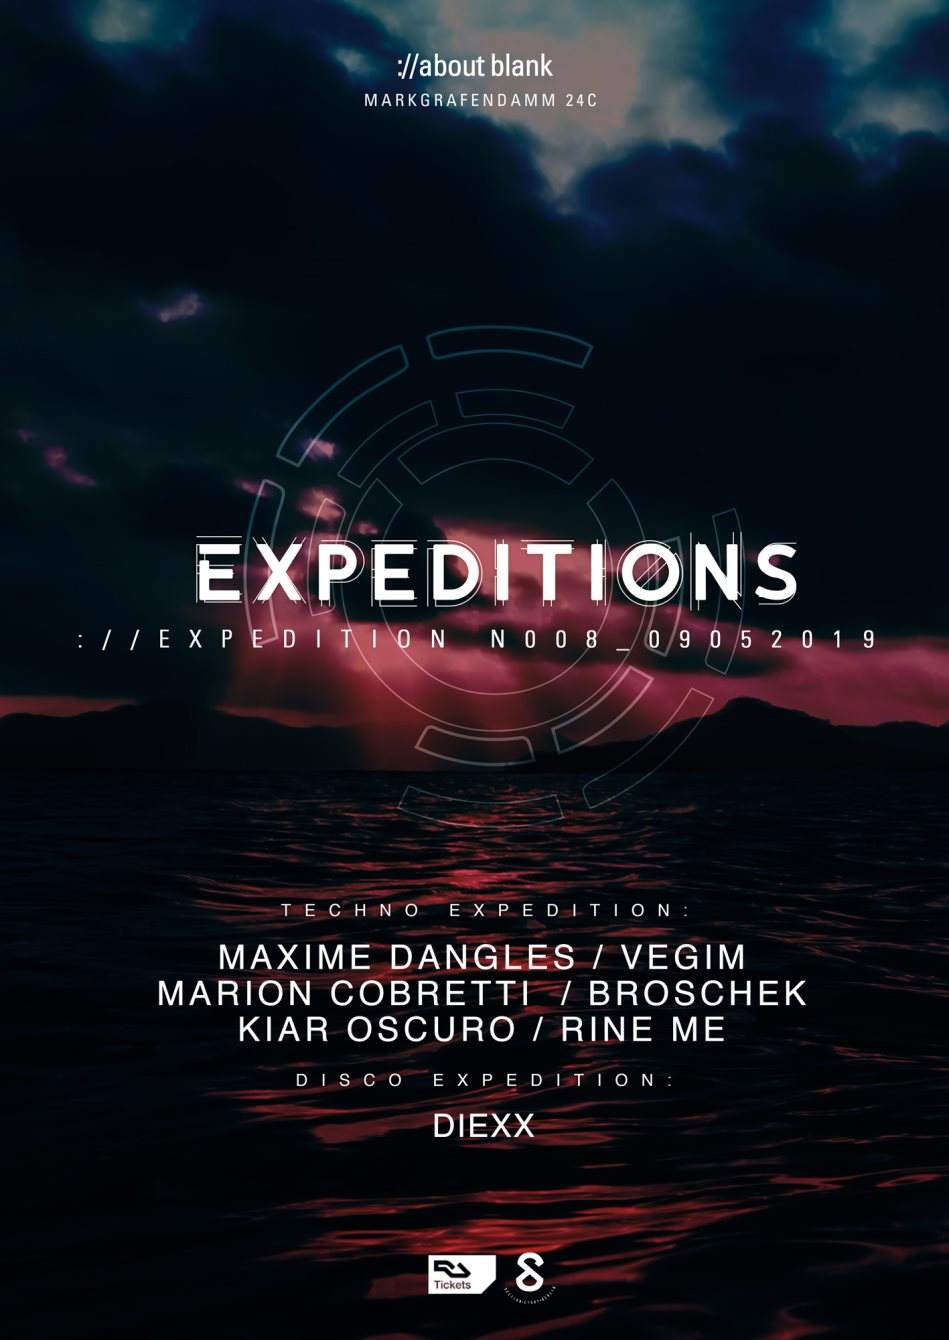 Expeditions N008 - フライヤー裏